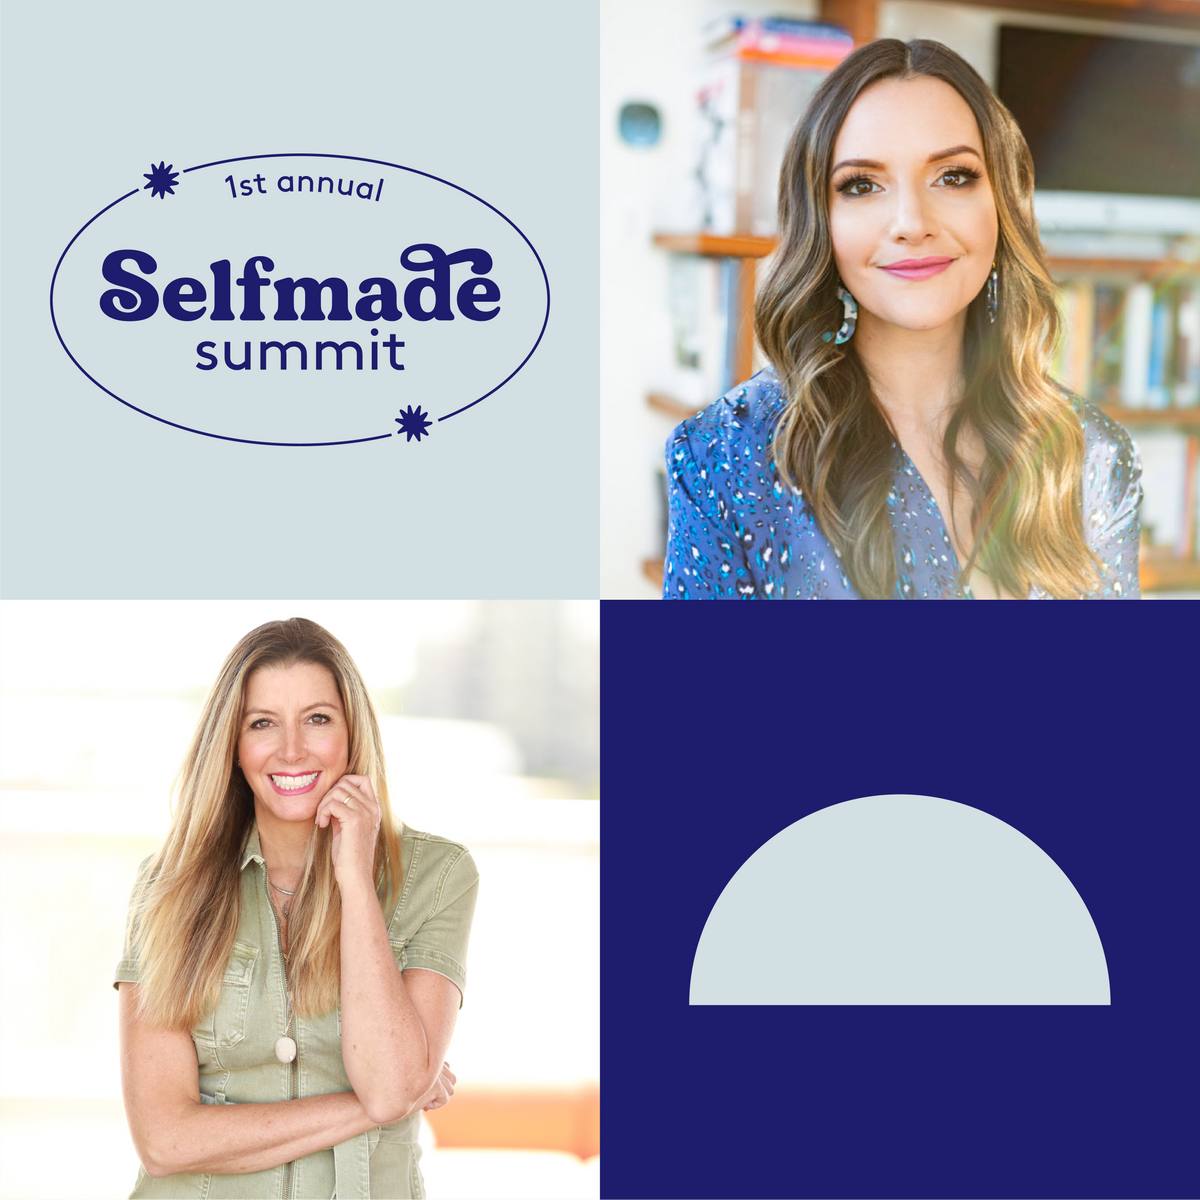 womens conference selfmade summit brit morin